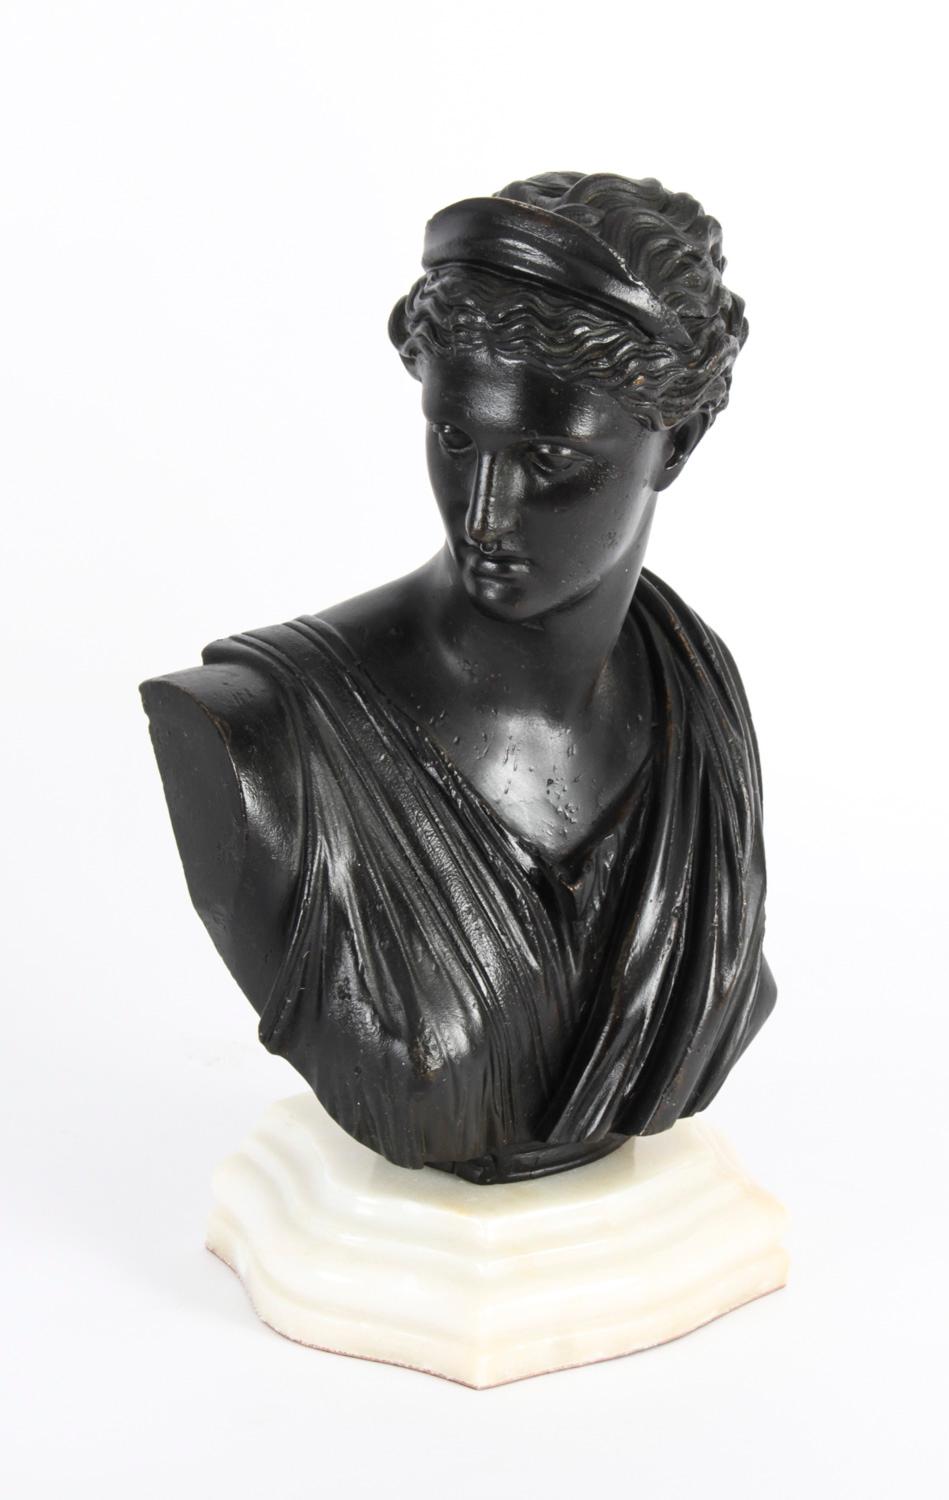 This is a fine antique pair of Italian Grand Tour solid bronze busts of Apollo and Diana, dating from the mid 19th century.
 
The pair feature black patinated finely cast busts mounted on stepped and shaped white Carrara marble pedestals.
